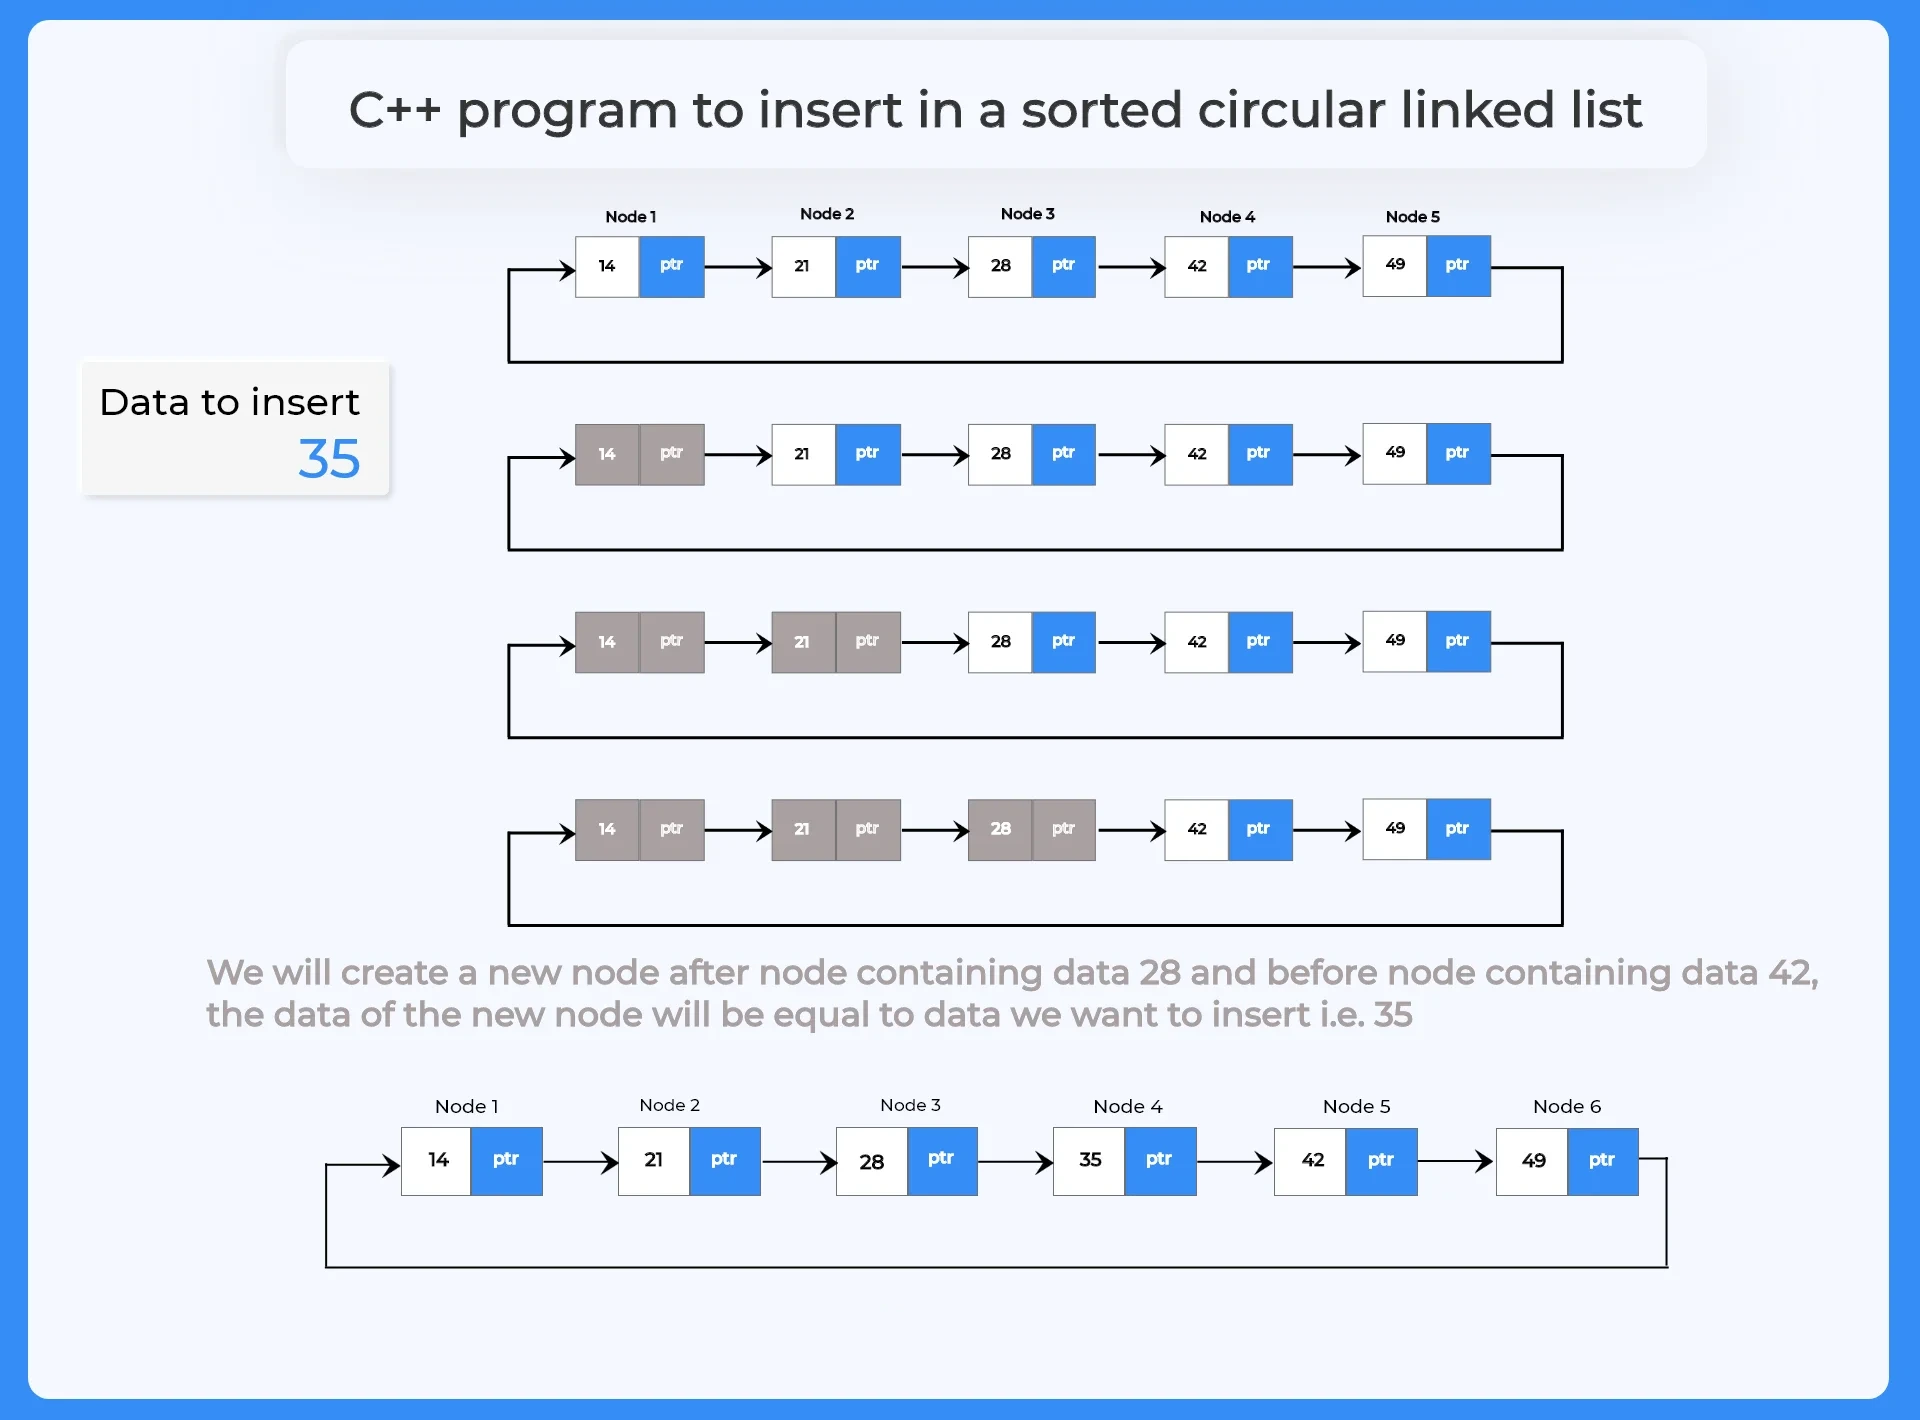 C++ Program to insert in a sorted circular linked list